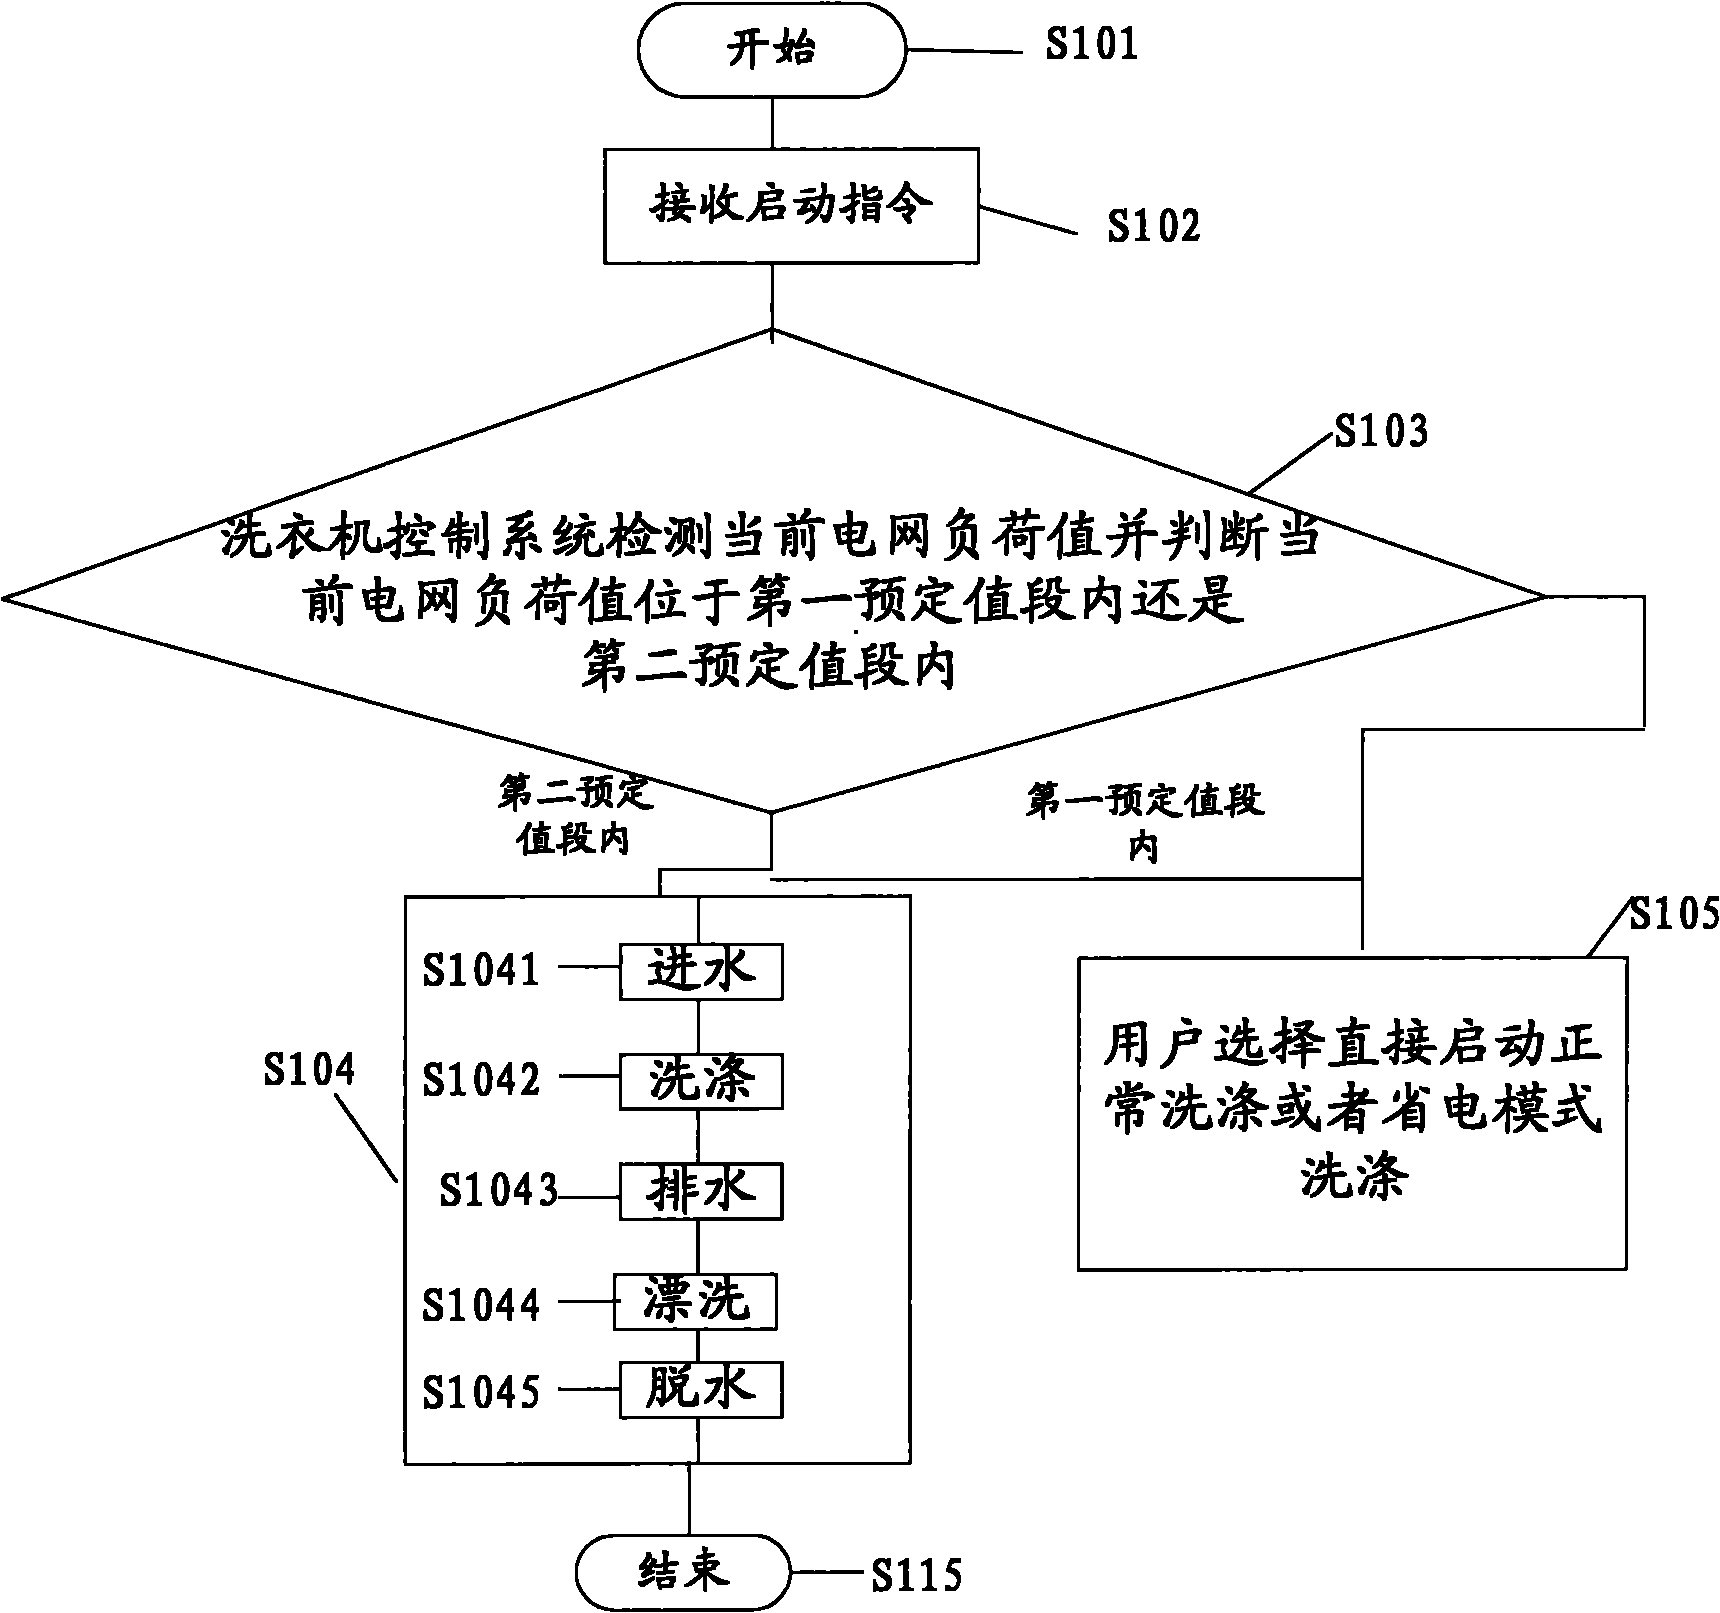 Washing machine control method and system for regulating washing procedure according to network load